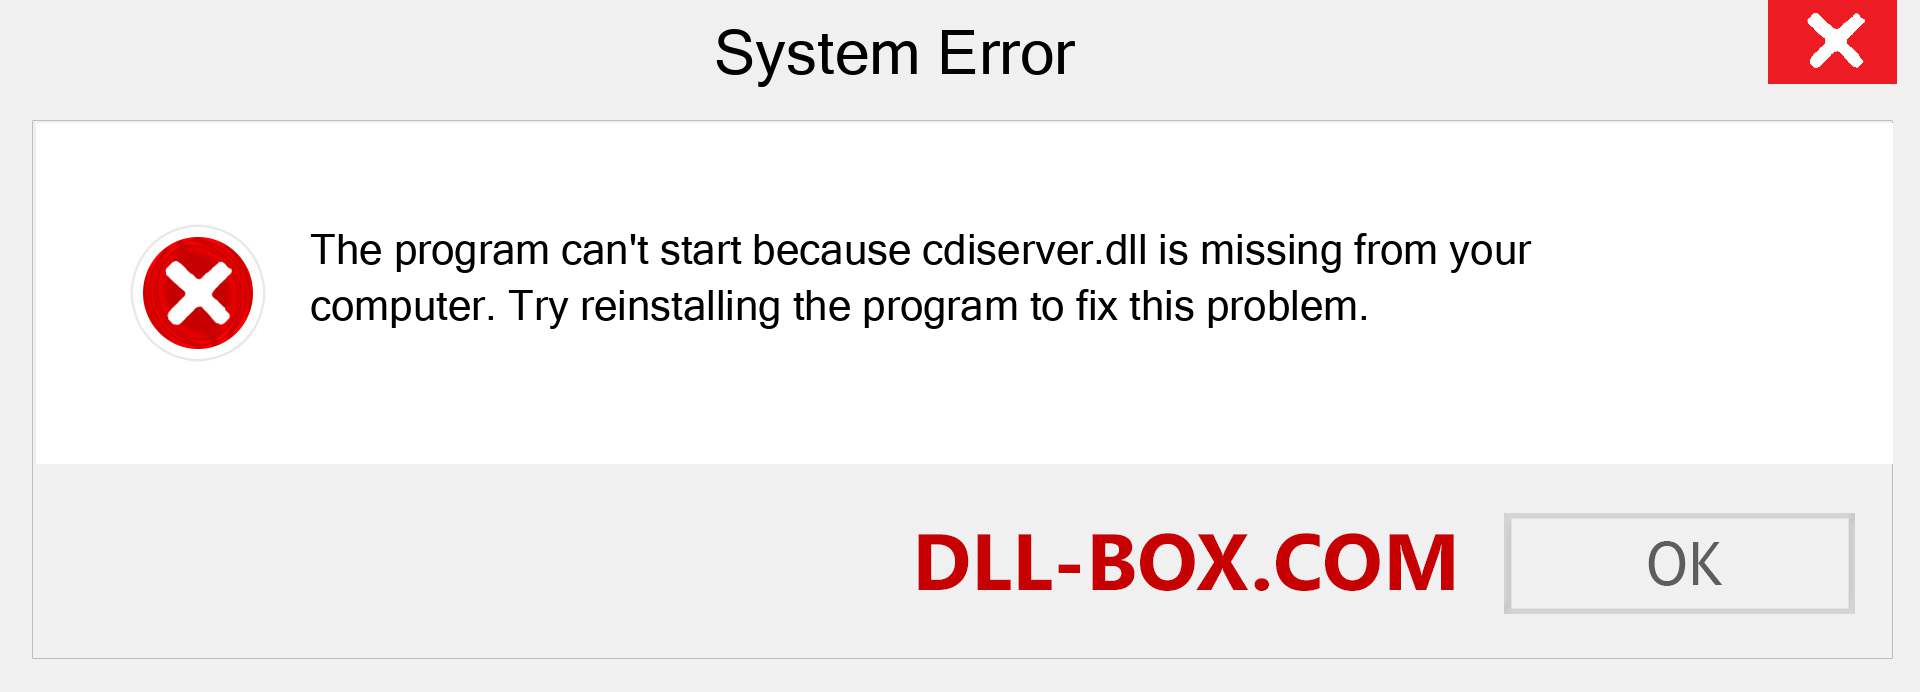  cdiserver.dll file is missing?. Download for Windows 7, 8, 10 - Fix  cdiserver dll Missing Error on Windows, photos, images